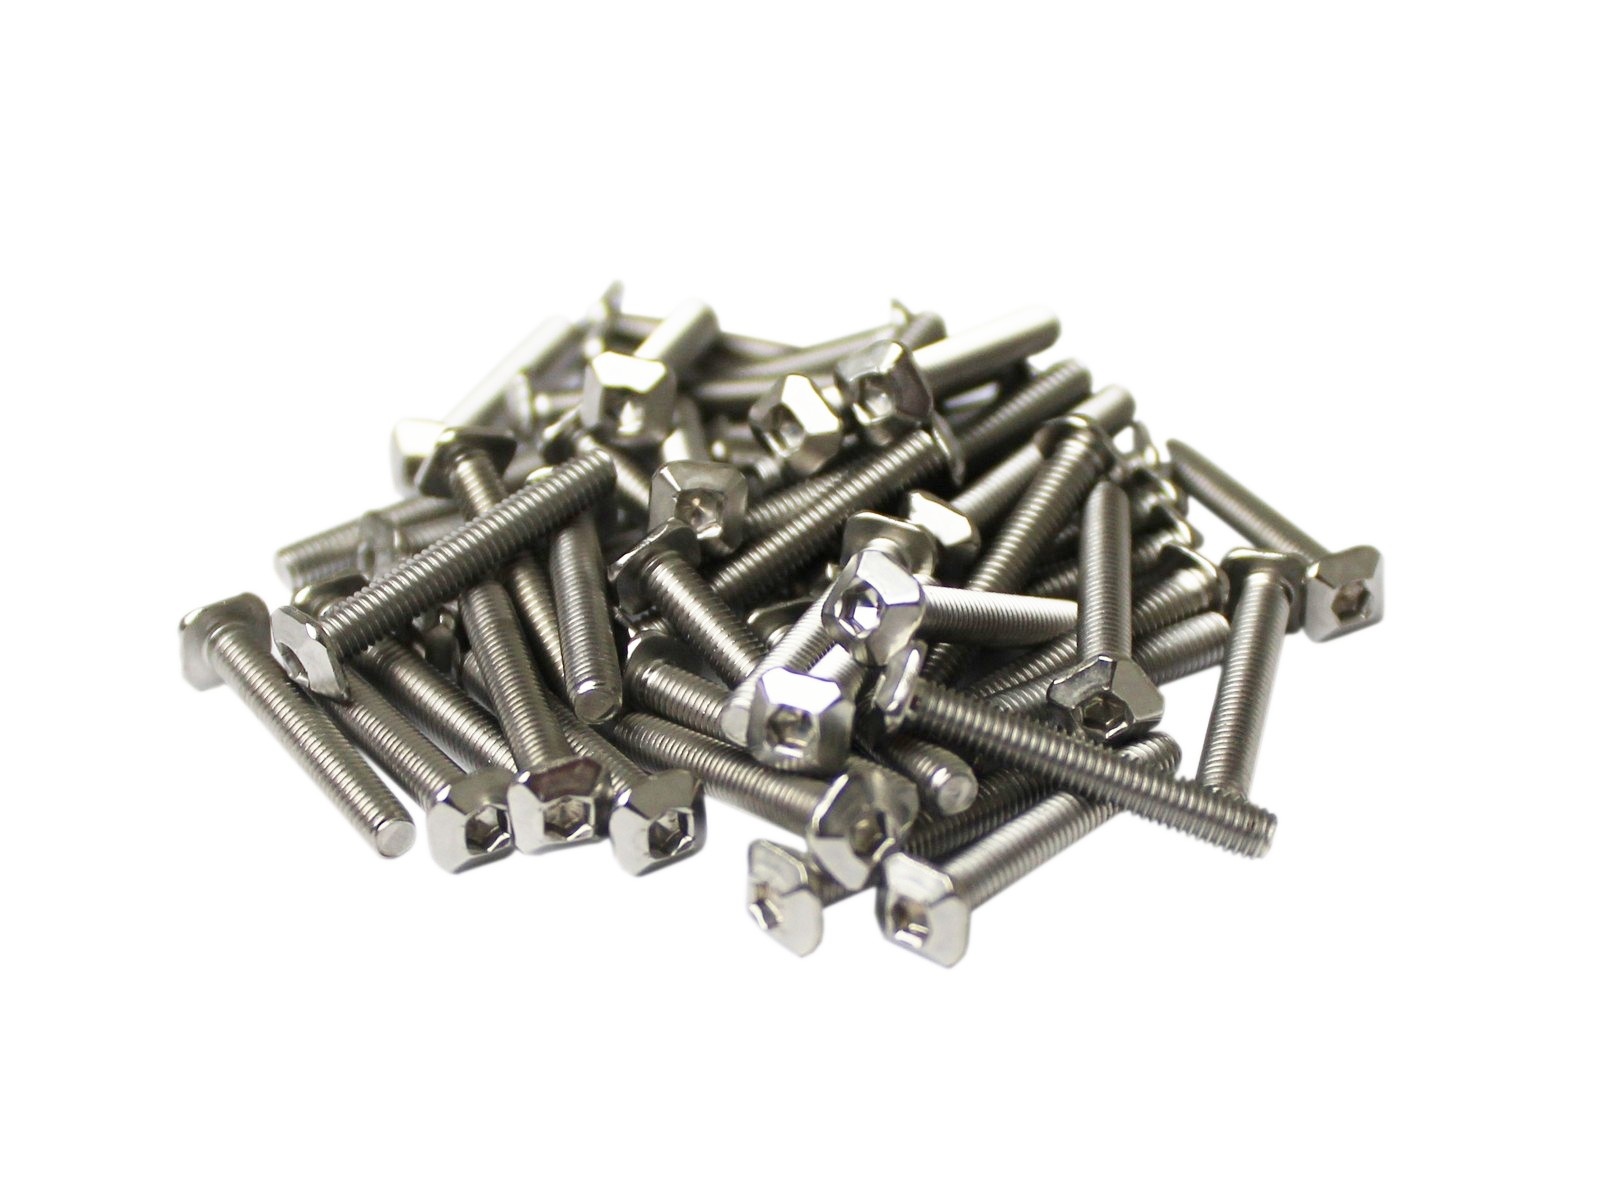 MakerBeam - 10mmx10mm 50 pieces, M3, 20mm, MakerBeam square headed bolts with hex hole